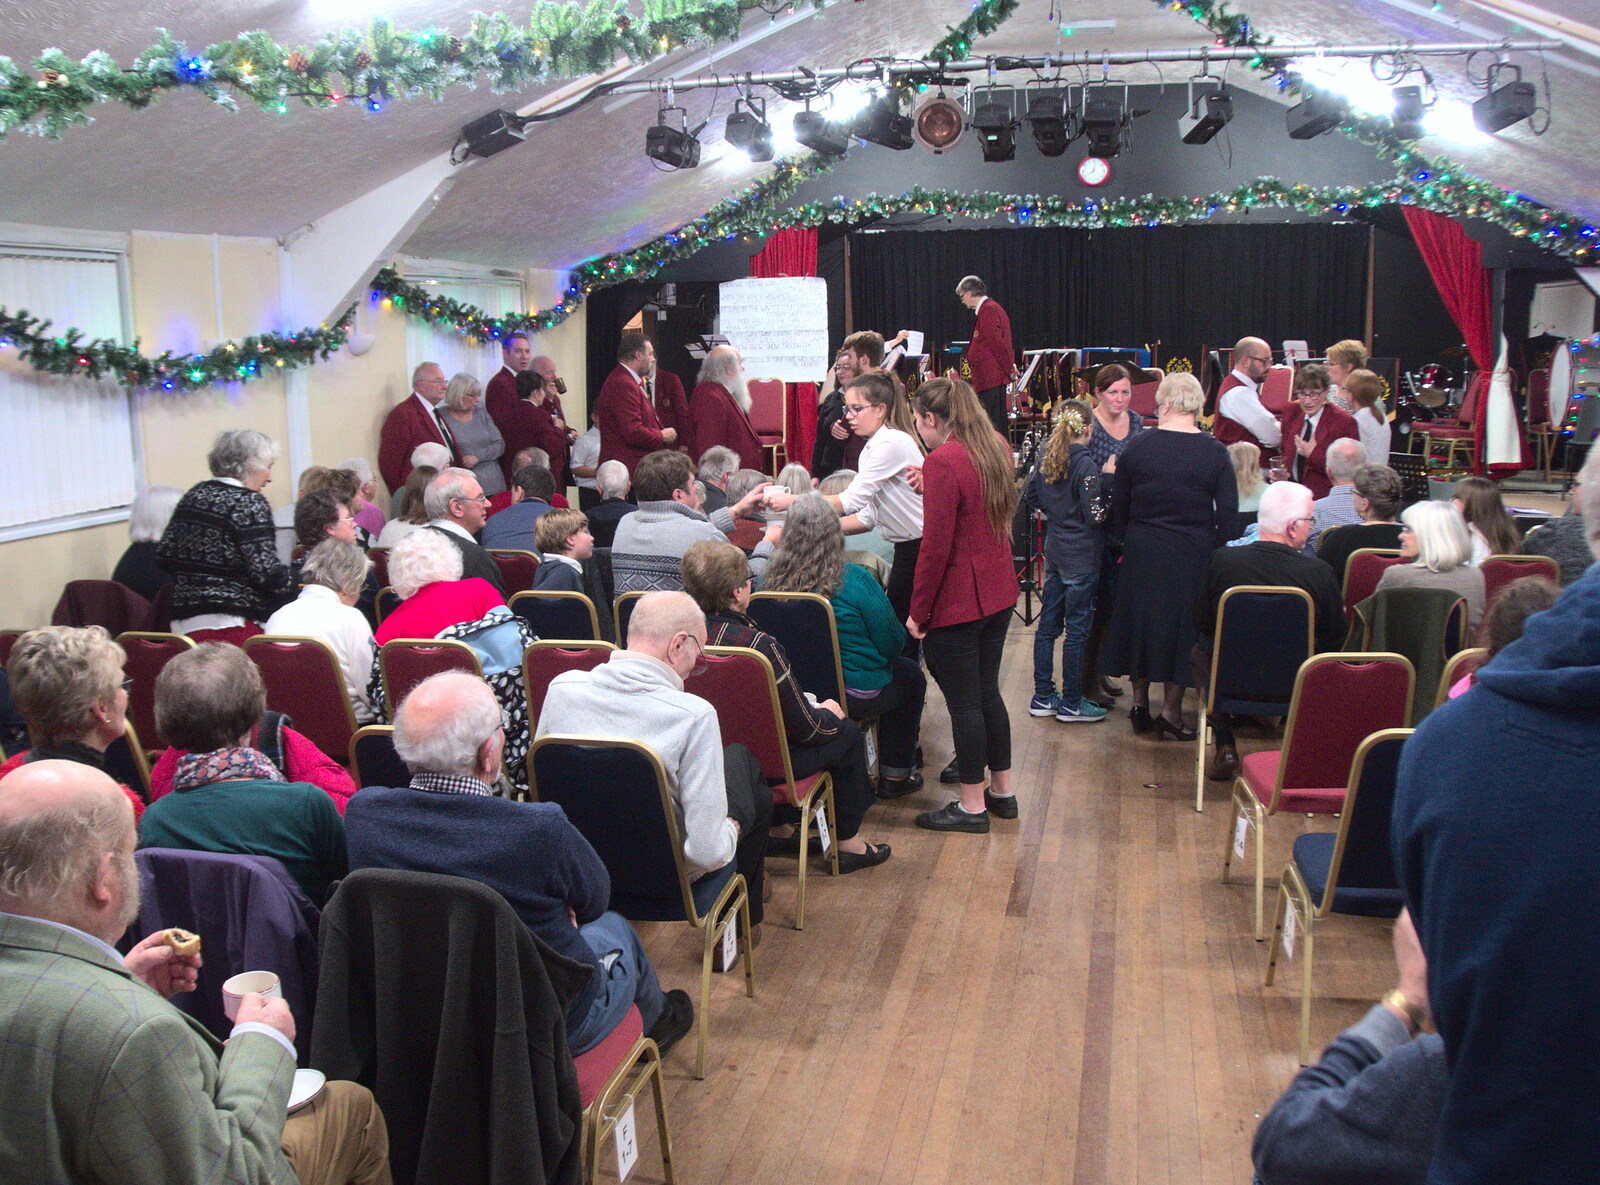 The room fills up from The Gislingham Silver Band Christmas Concert, Gislingham, Suffolk - 11th December 2018